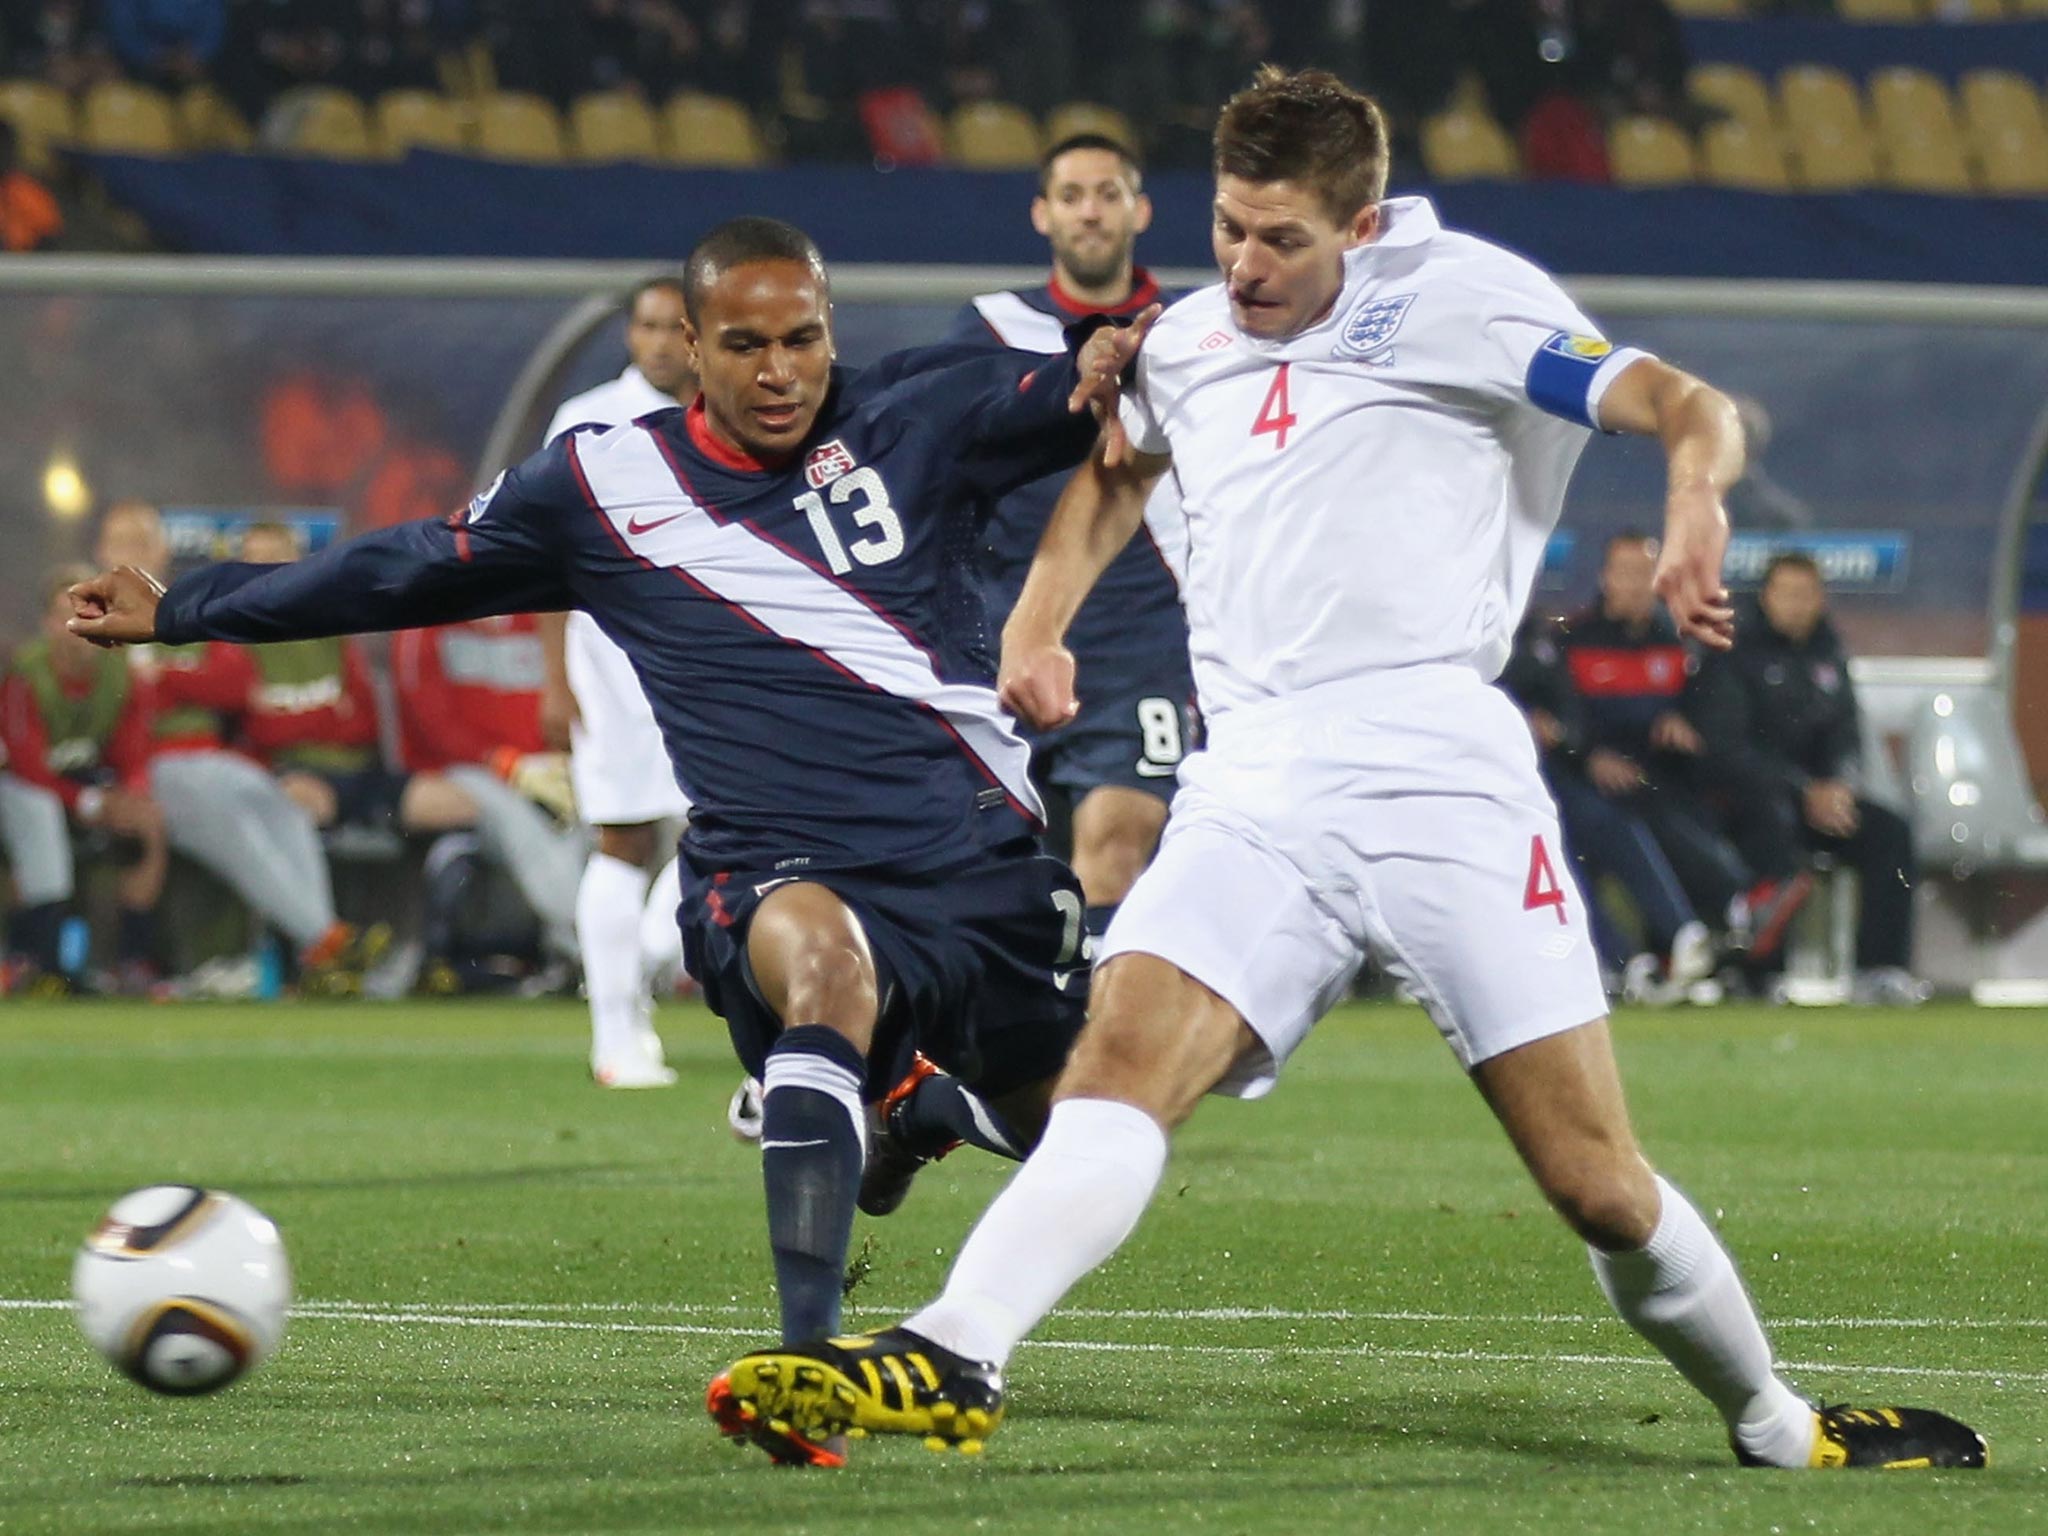 Steven Gerrard scores for England during the 1-1 draw with the United States in their opening game of the 2010 World Cup in South Africa